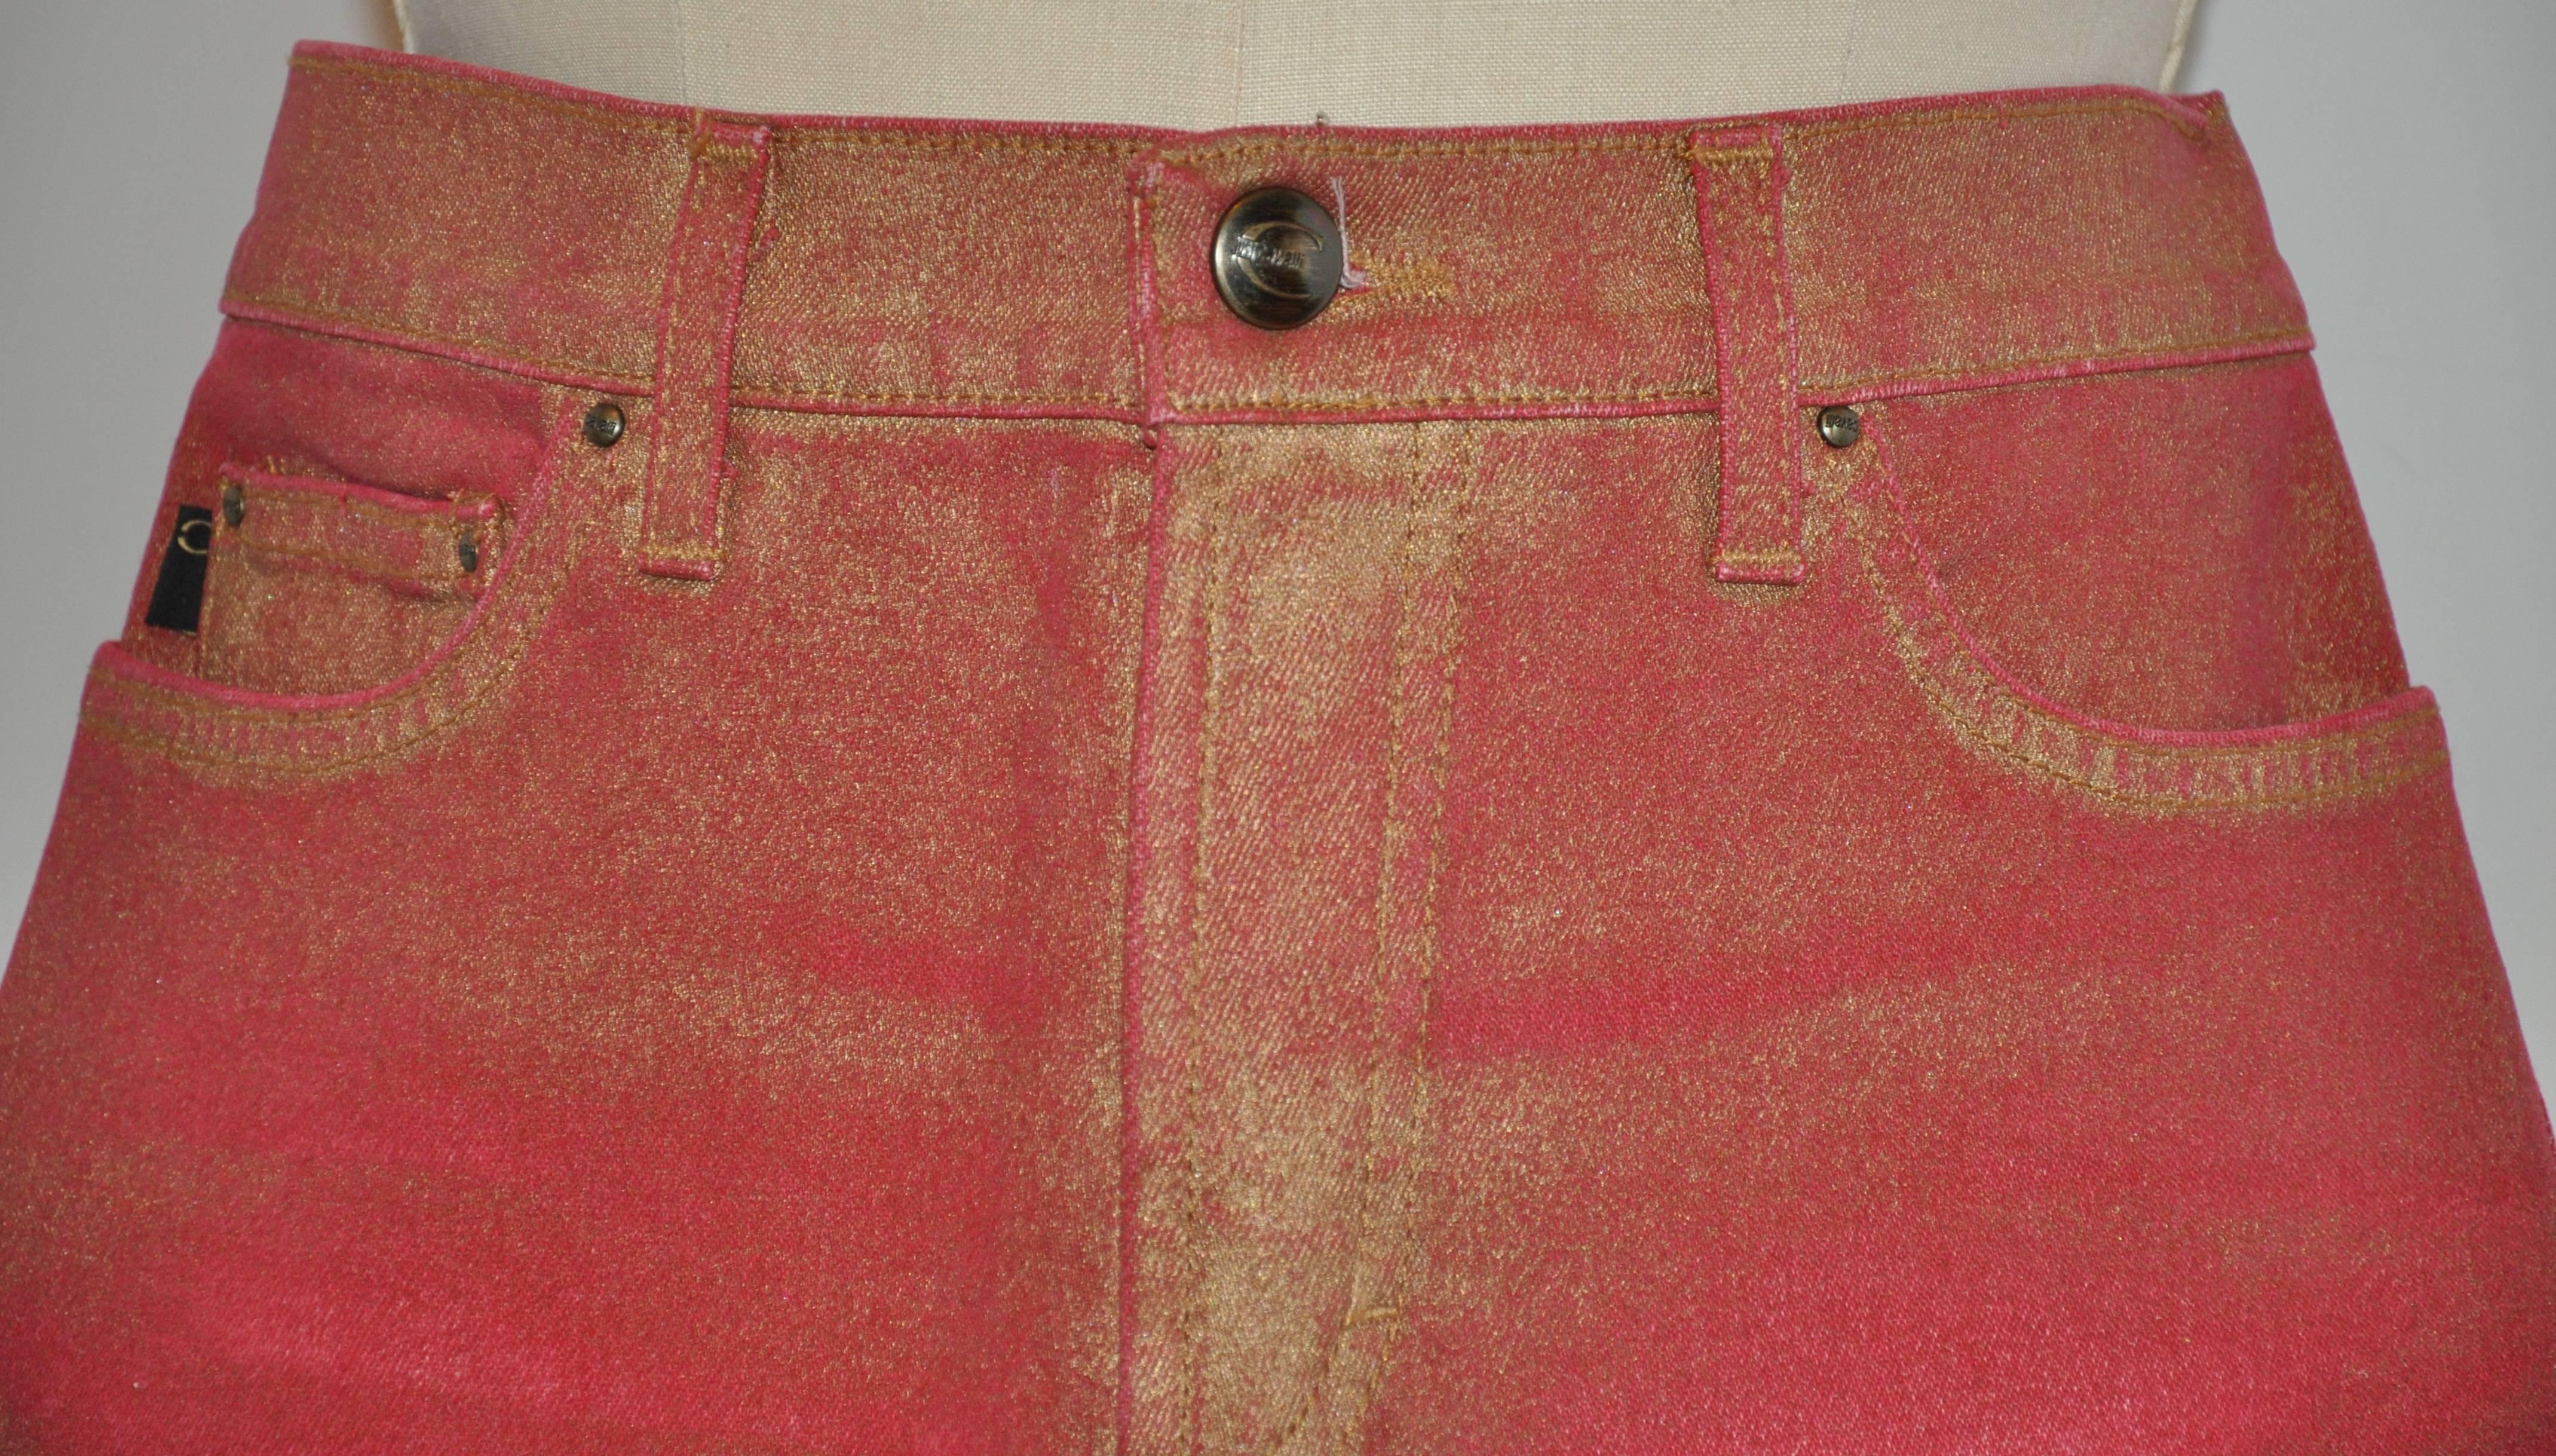           Roberto Cavalli wonderfully wicked metallic red with gold stretch 5-pocket jean style pants measures 29 1/2